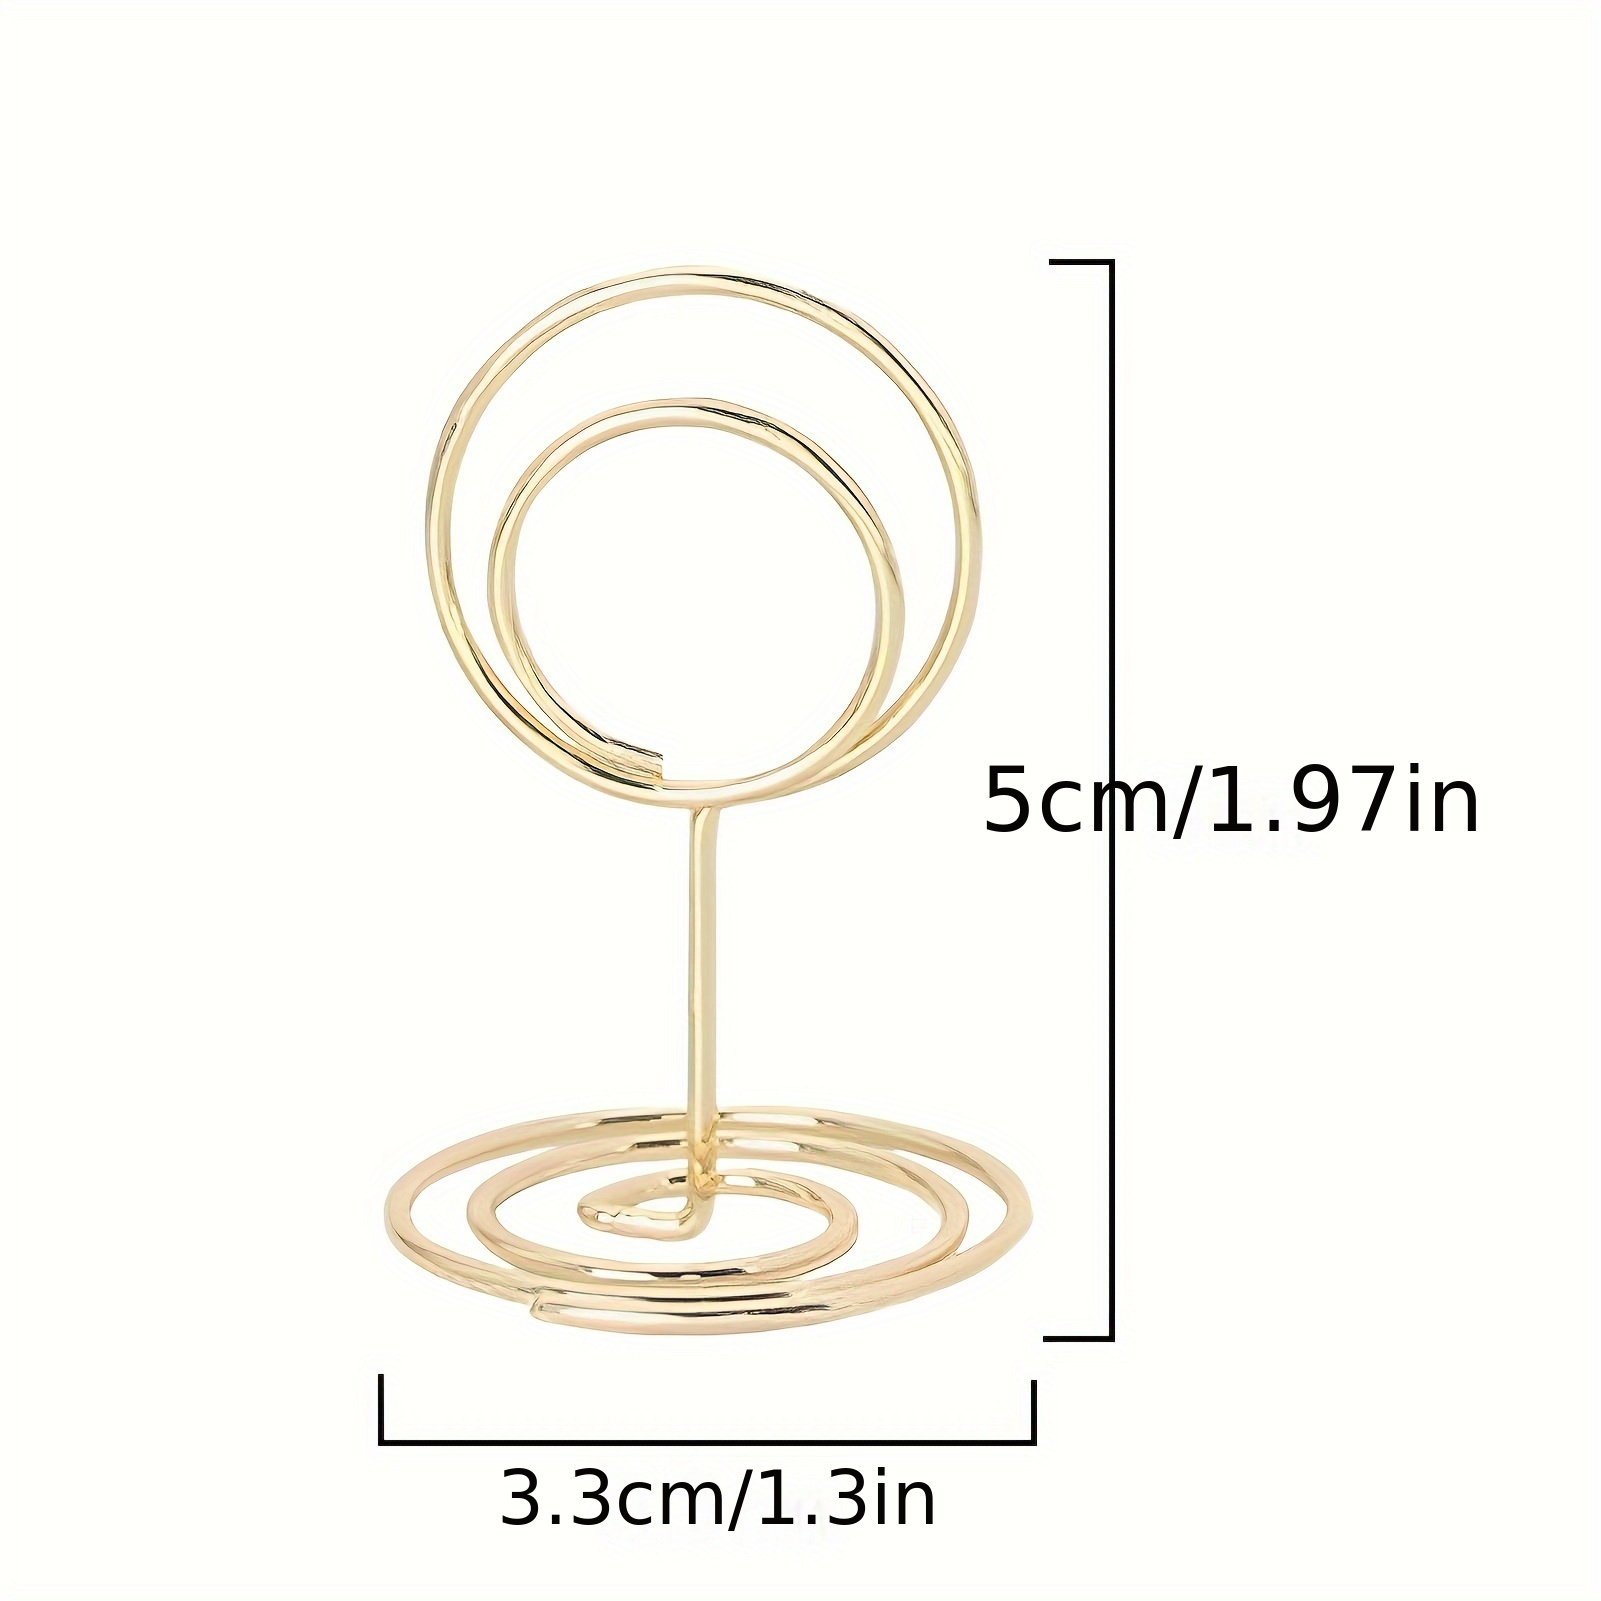 12 inch Floral Place Card Holder,40Pcs Gold Ring Shape Table Number Holders,Metal Wire Photo Holders for Centerpieces,Picture Menu Noto Clips Memo